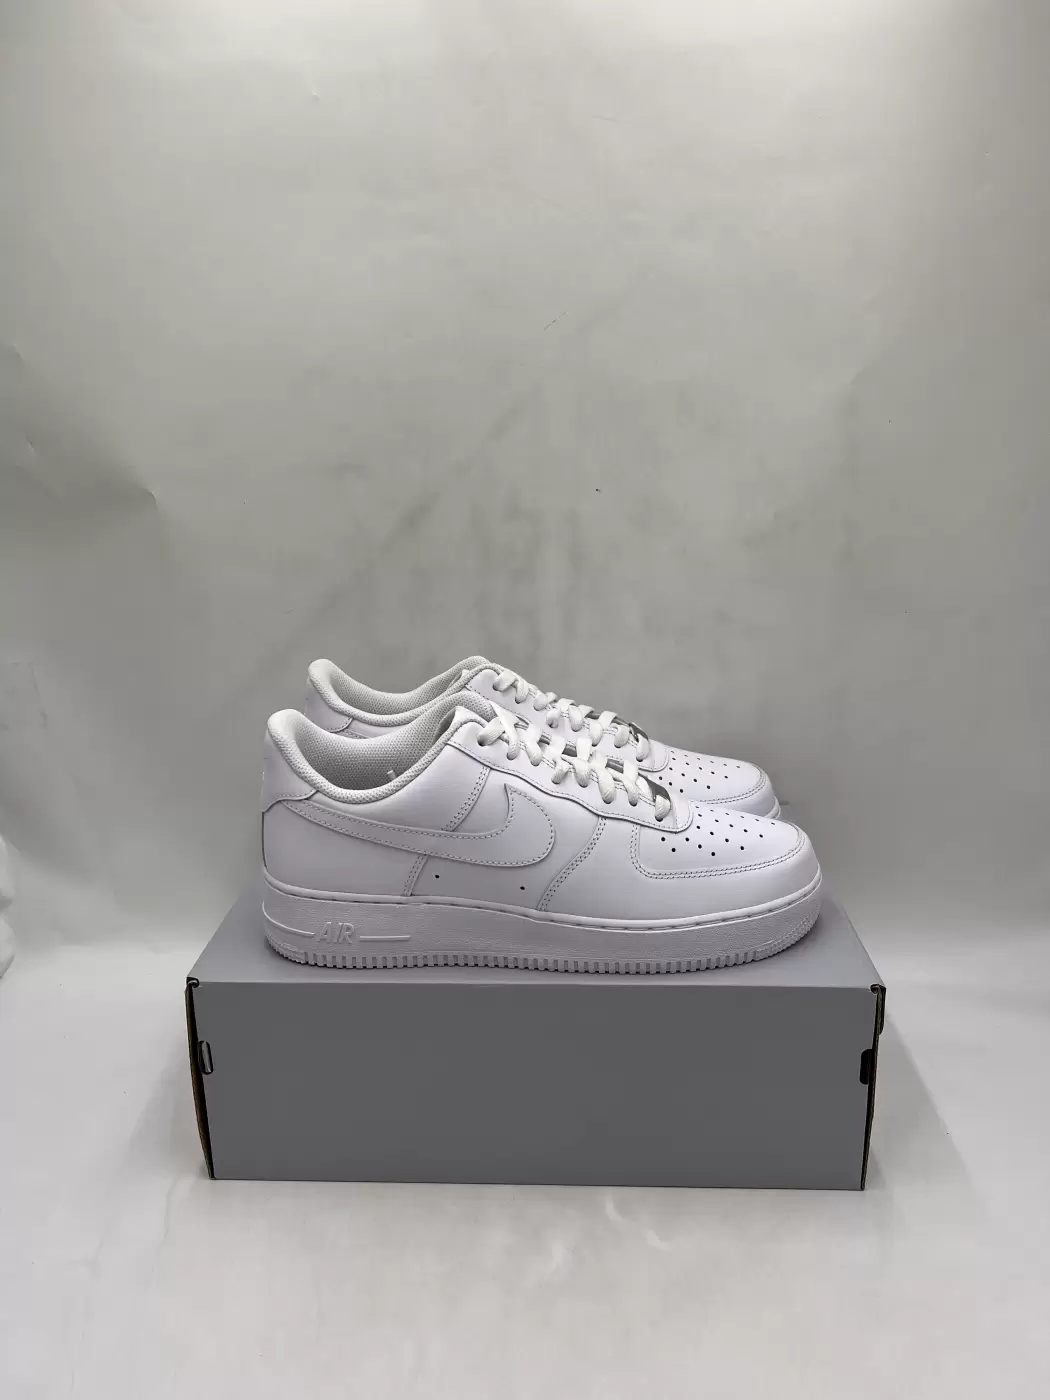 Nike Air Force 1 Low 07 White | AfterMarket